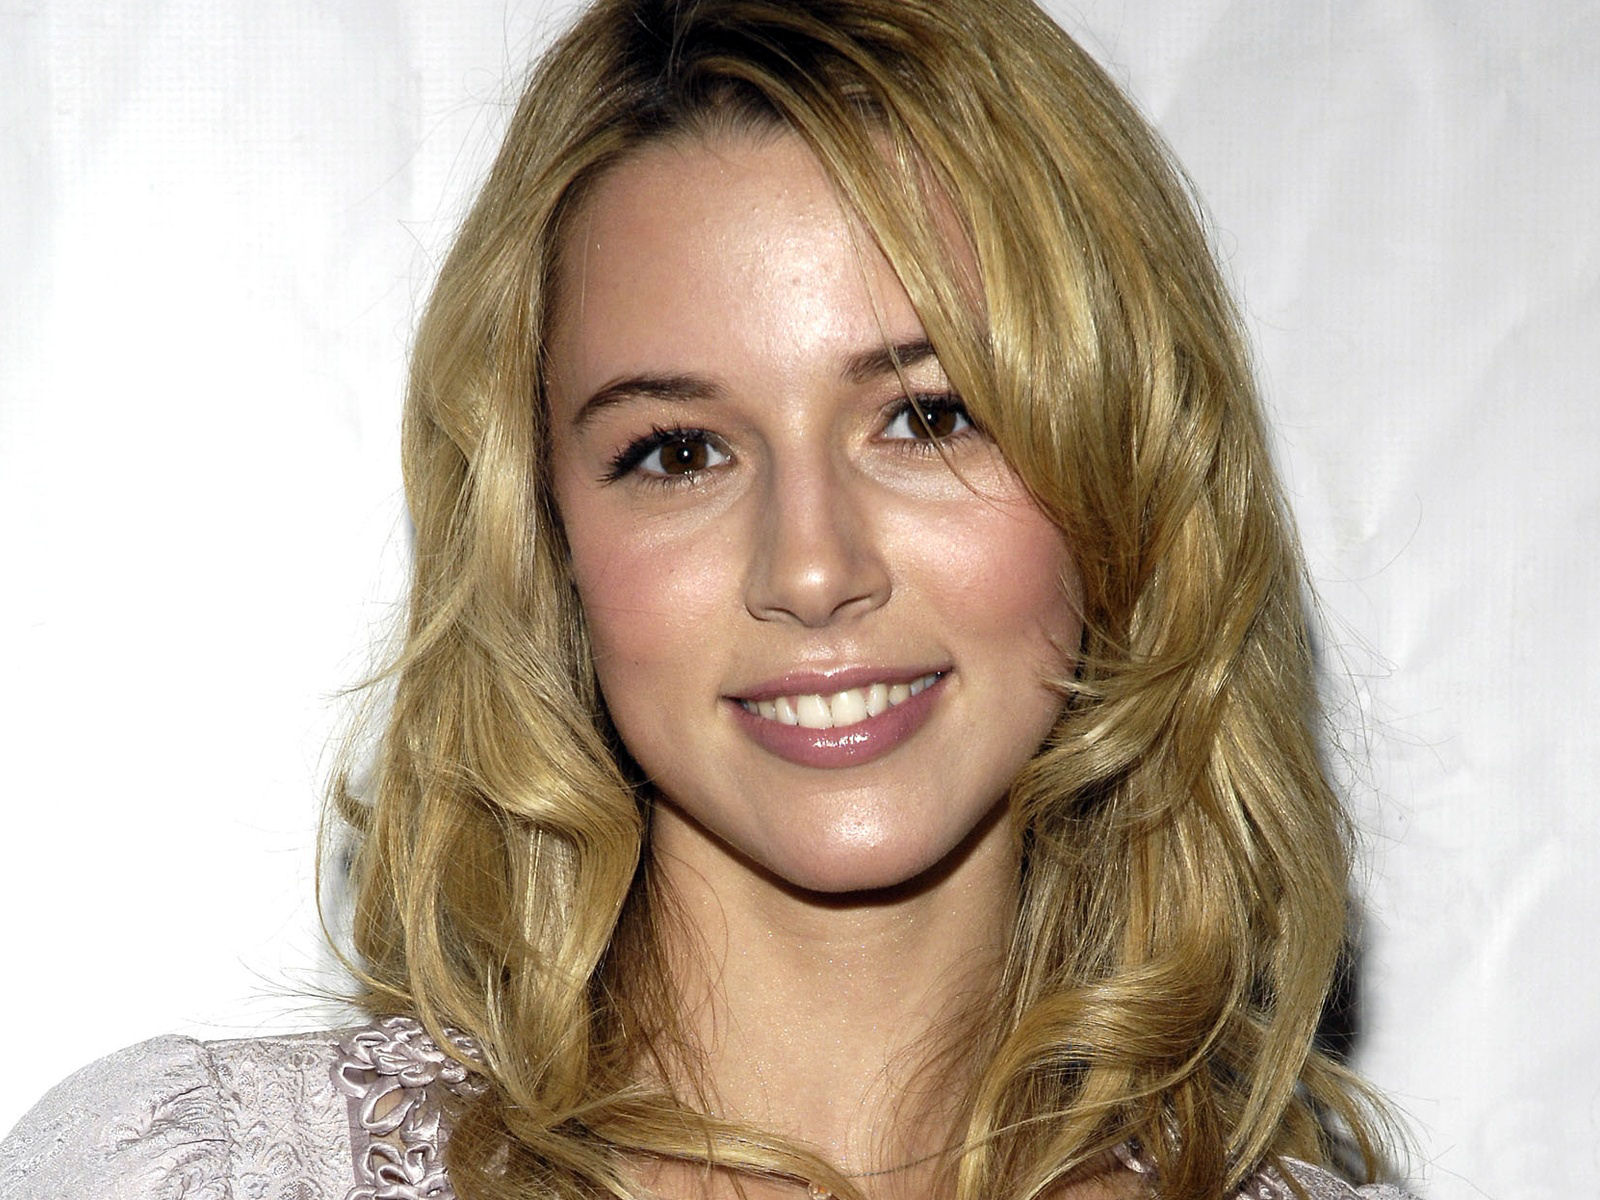 General photo of Alona Tal